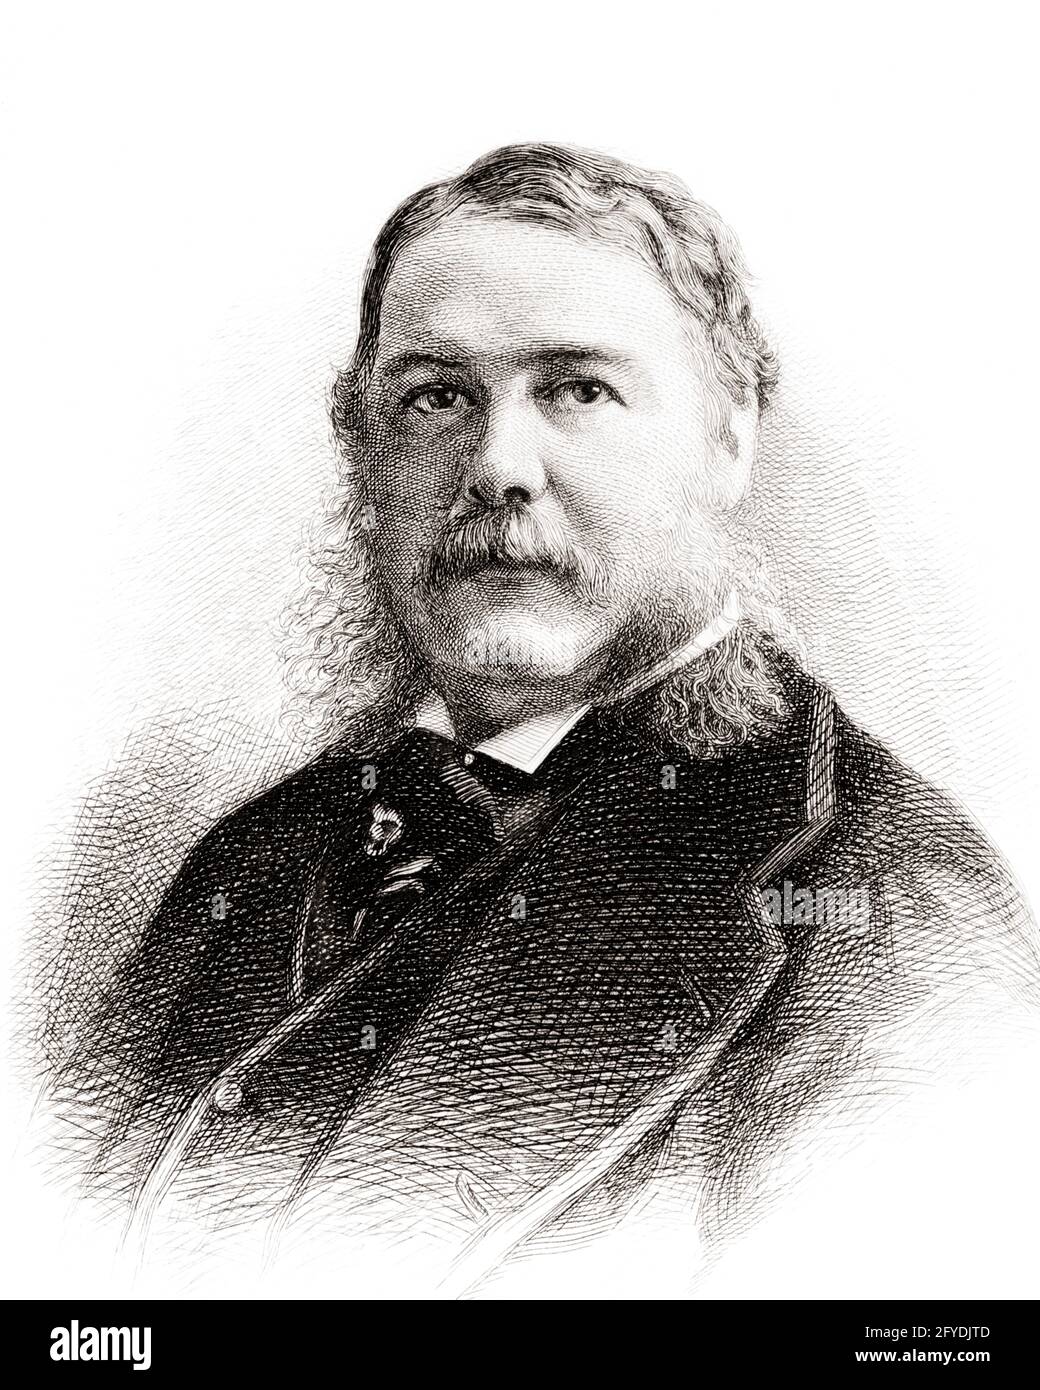 1880s CHESTER A. ARTHUR 21ST PRESIDENT UNITED STATES OF AMERICA BECAME PRESIDENT AFTER ASSASSINATION OF GARFIELD SEPTEMBER 1881 - q49003 CPC001 HARS OCCUPATIONS POLITICS VICE PRESIDENT CHESTER ARTHUR CONCEPTUAL 1880s GARFIELD SUPPORT JAMES GARFIELD SIDEBURNS 1881 A. BECAME BLACK AND WHITE CAUCASIAN ETHNICITY OLD FASHIONED SEPTEMBER Stock Photo